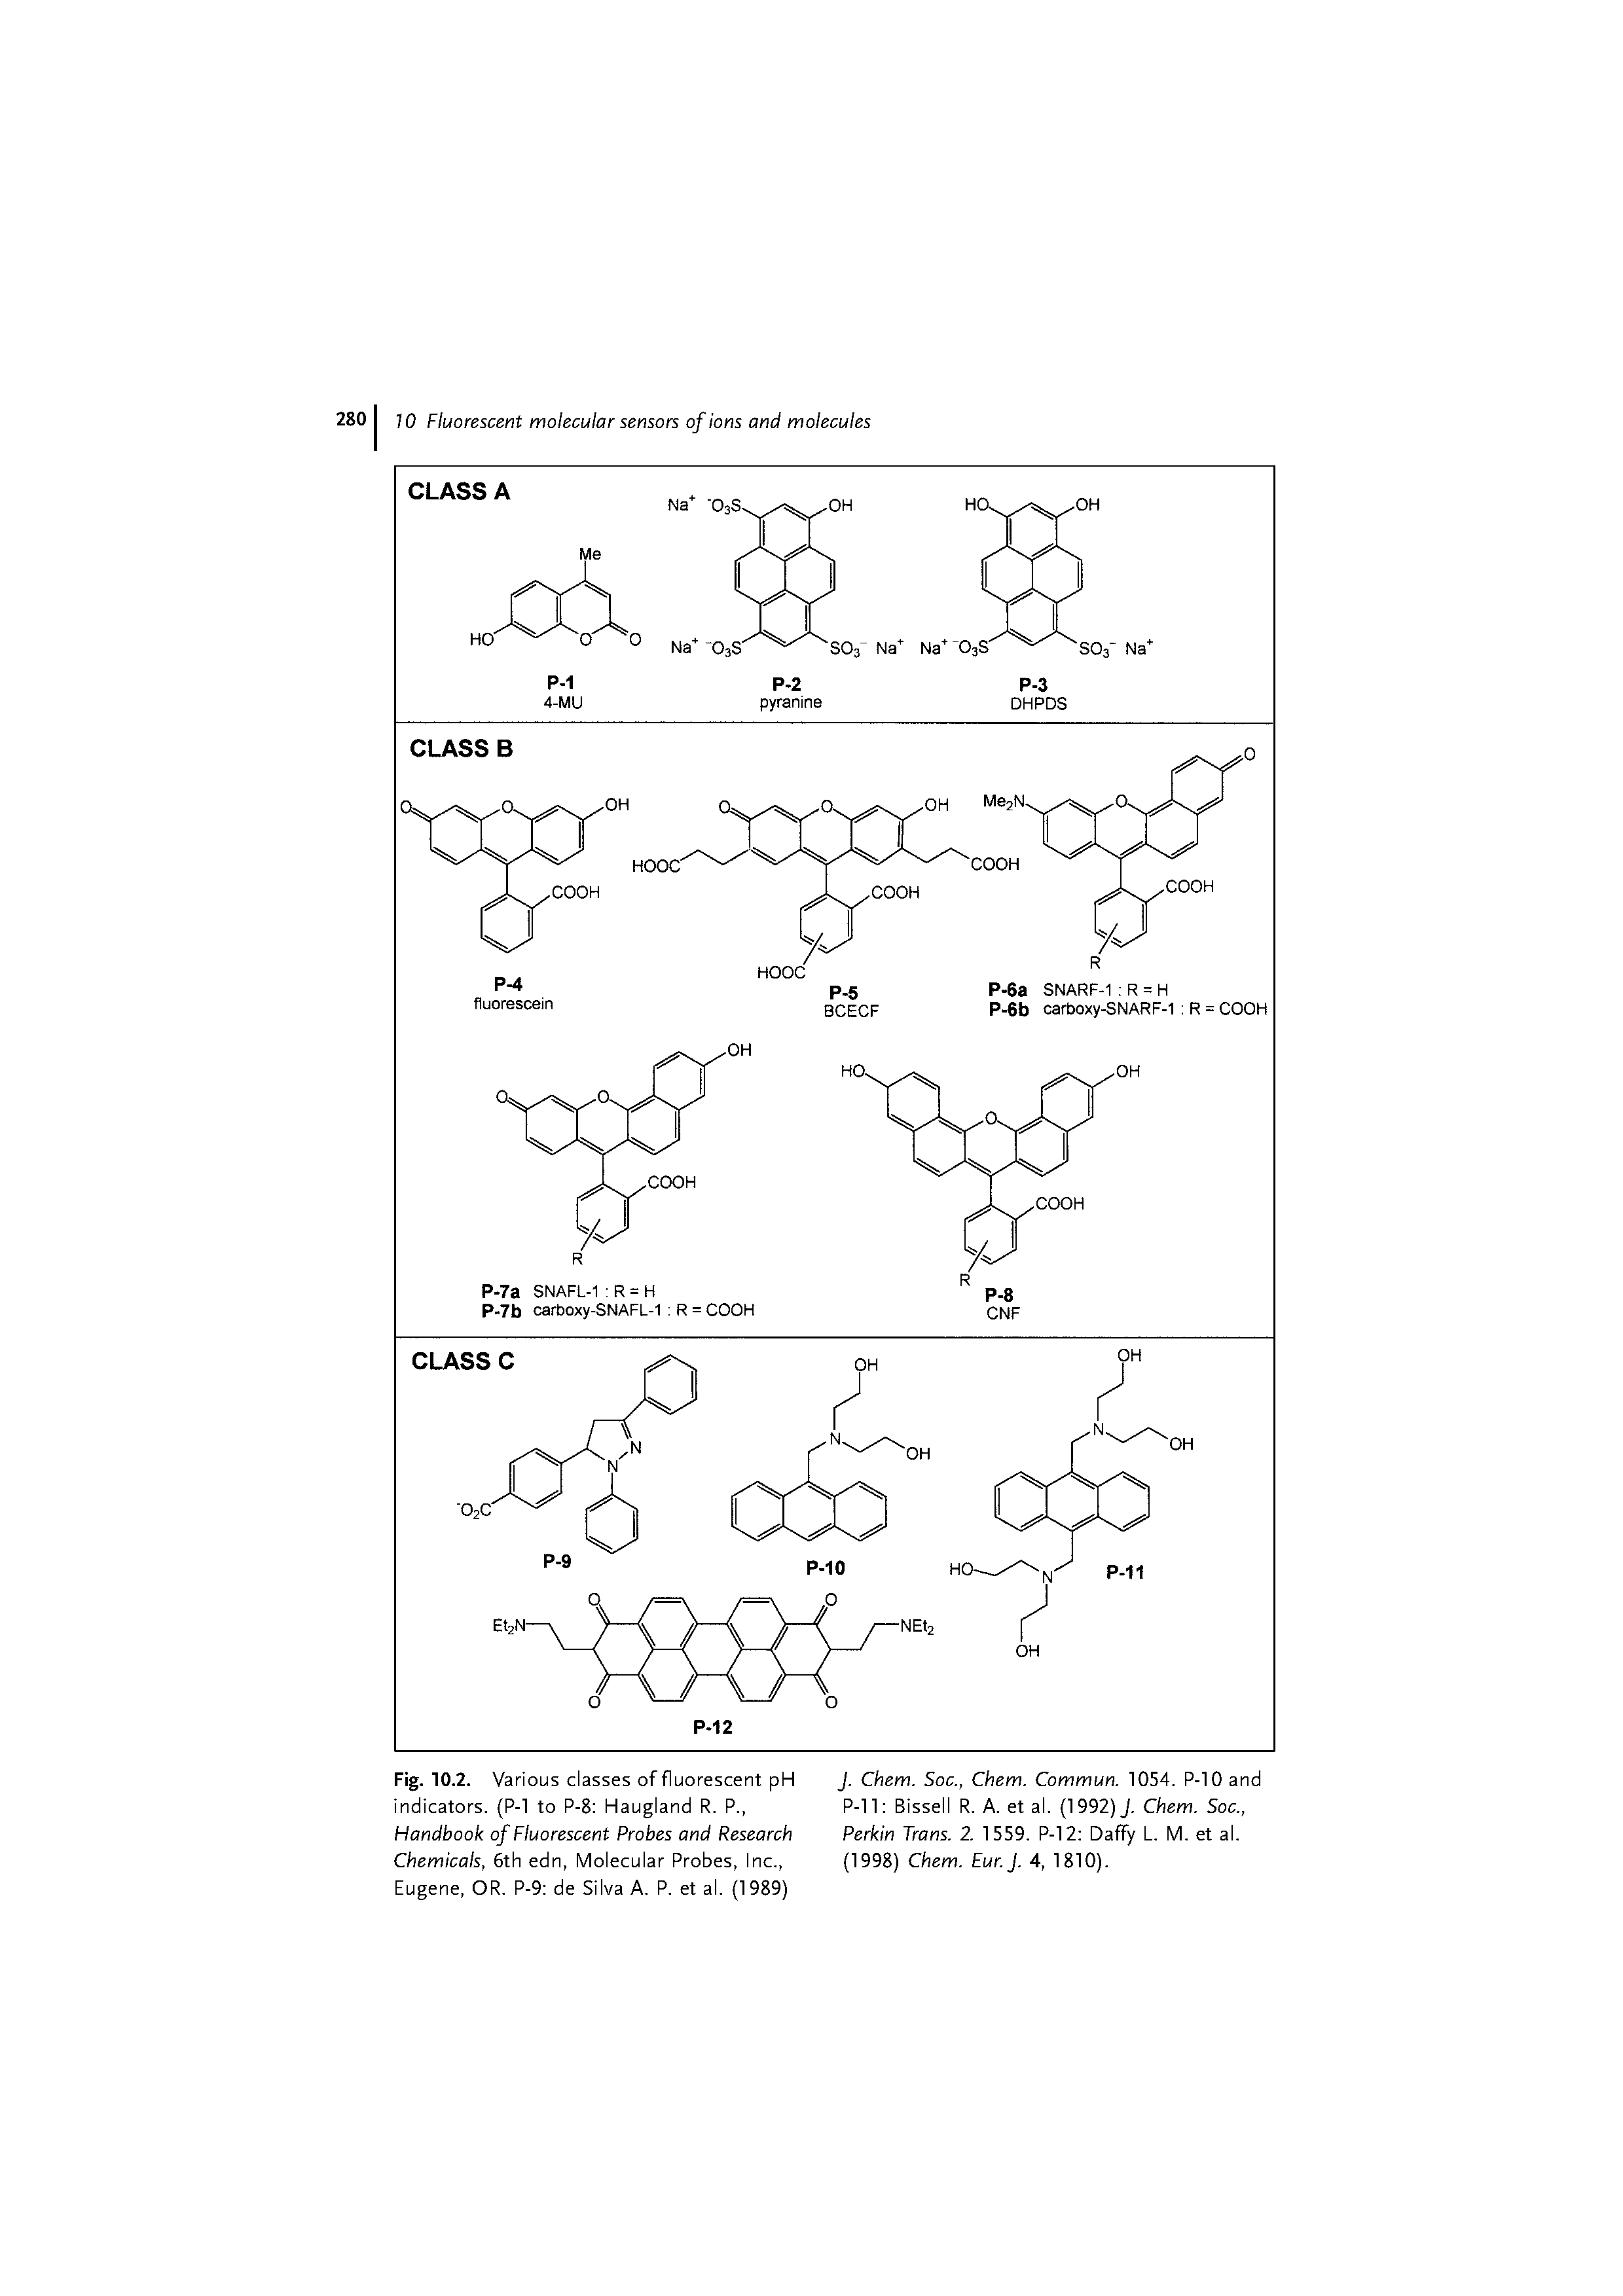 Fig. 10.2. Various classes of fluorescent pH indicators. (P-1 to P-8 Haugland R. P., Handbook of Fluorescent Probes and Research Chemicals, 6th edn, Molecular Probes, Inc., Eugene, OR. P-9 de Silva A. P. et al. (1989)...